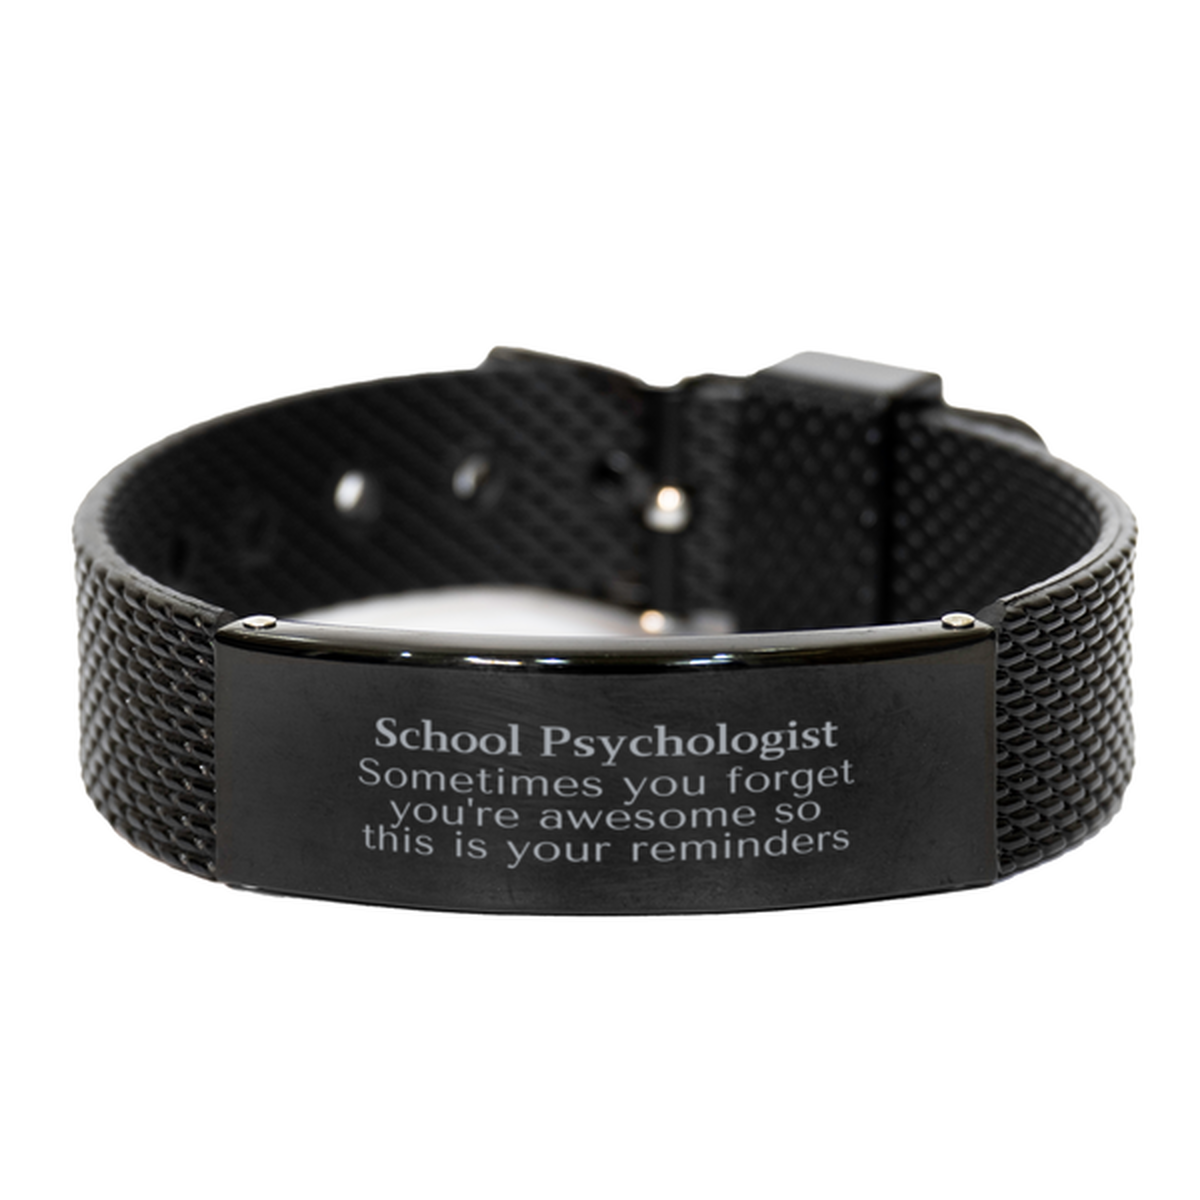 Sentimental School Psychologist Black Shark Mesh Bracelet, School Psychologist Sometimes you forget you're awesome so this is your reminders, Graduation Christmas Birthday Gifts for School Psychologist, Men, Women, Coworkers